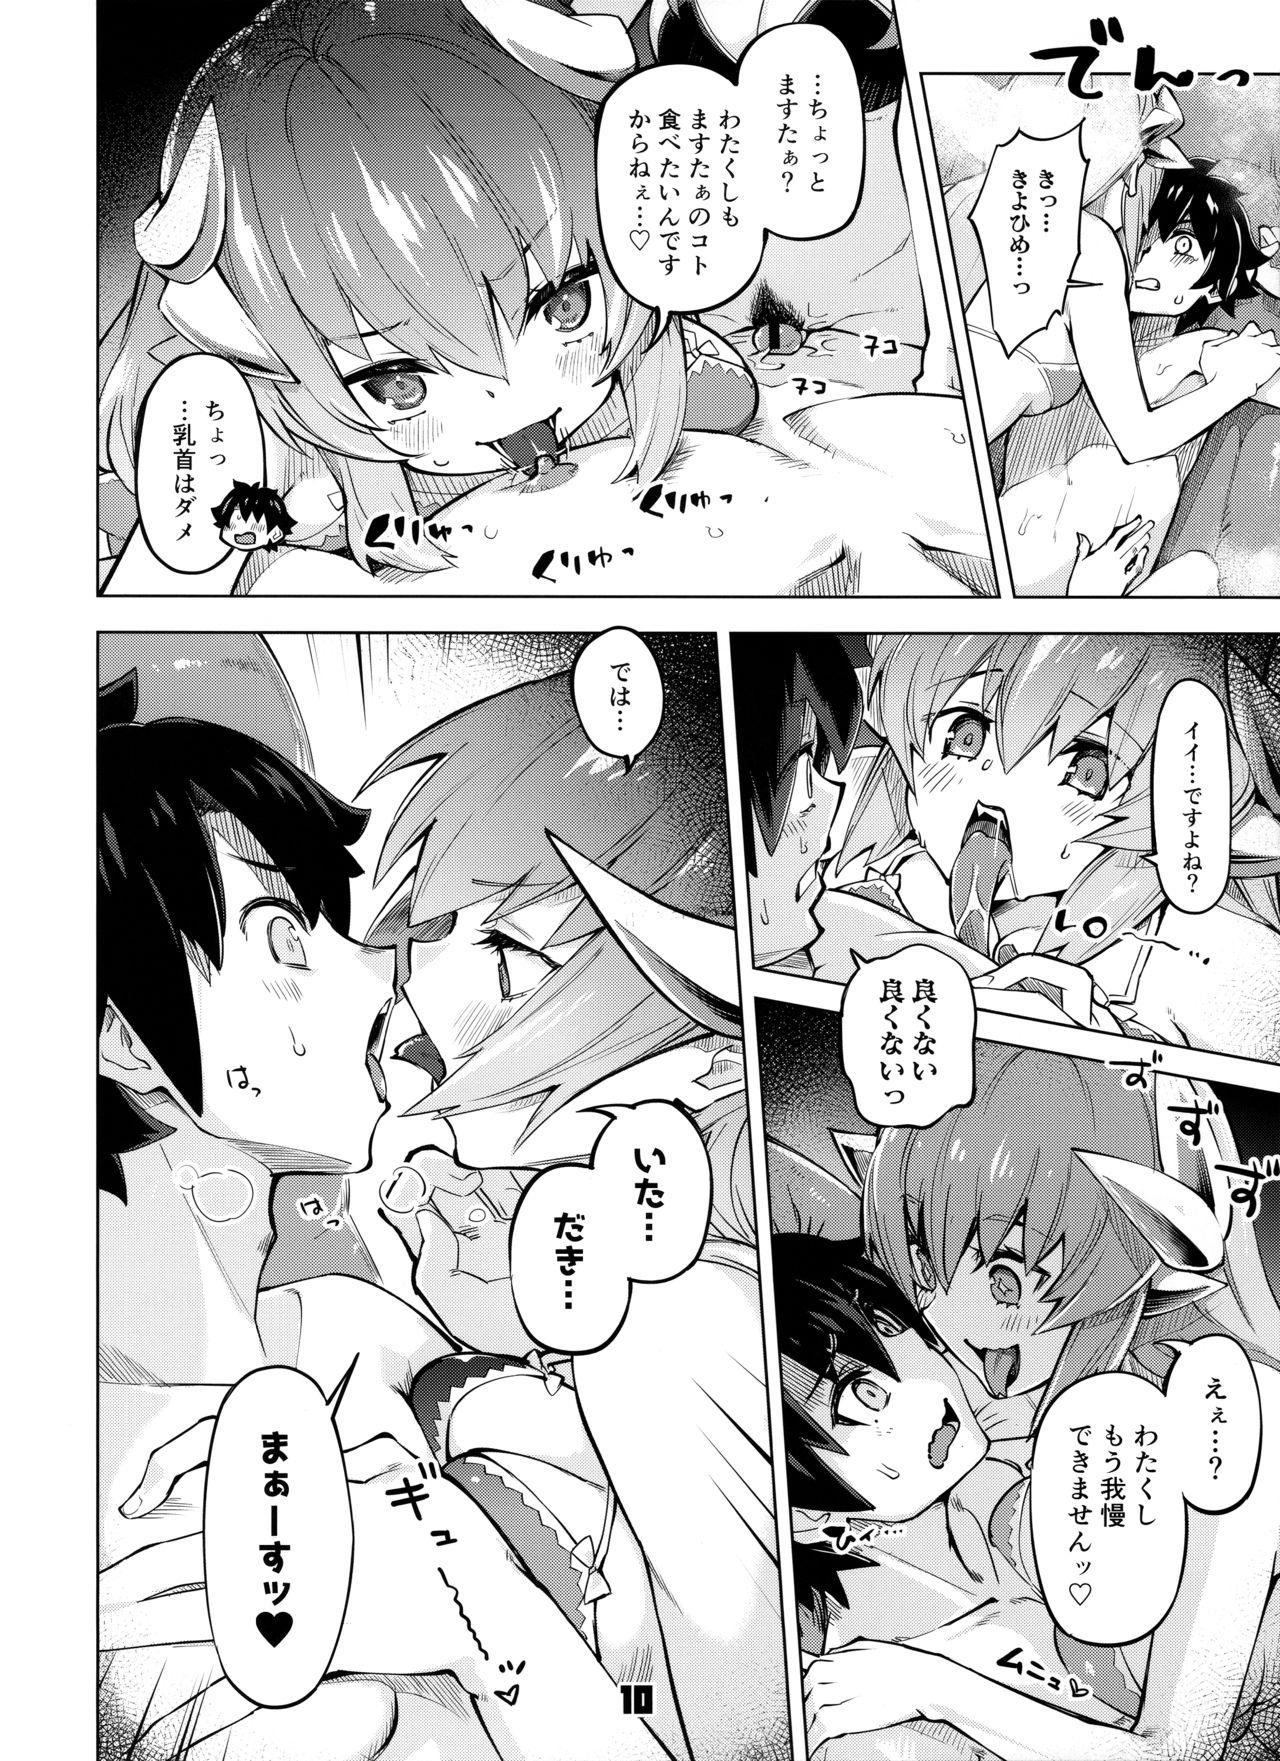 Nerd Sex Shinai to Derarenai My Room 2 - My room can not go out - Fate grand order Putaria - Page 9